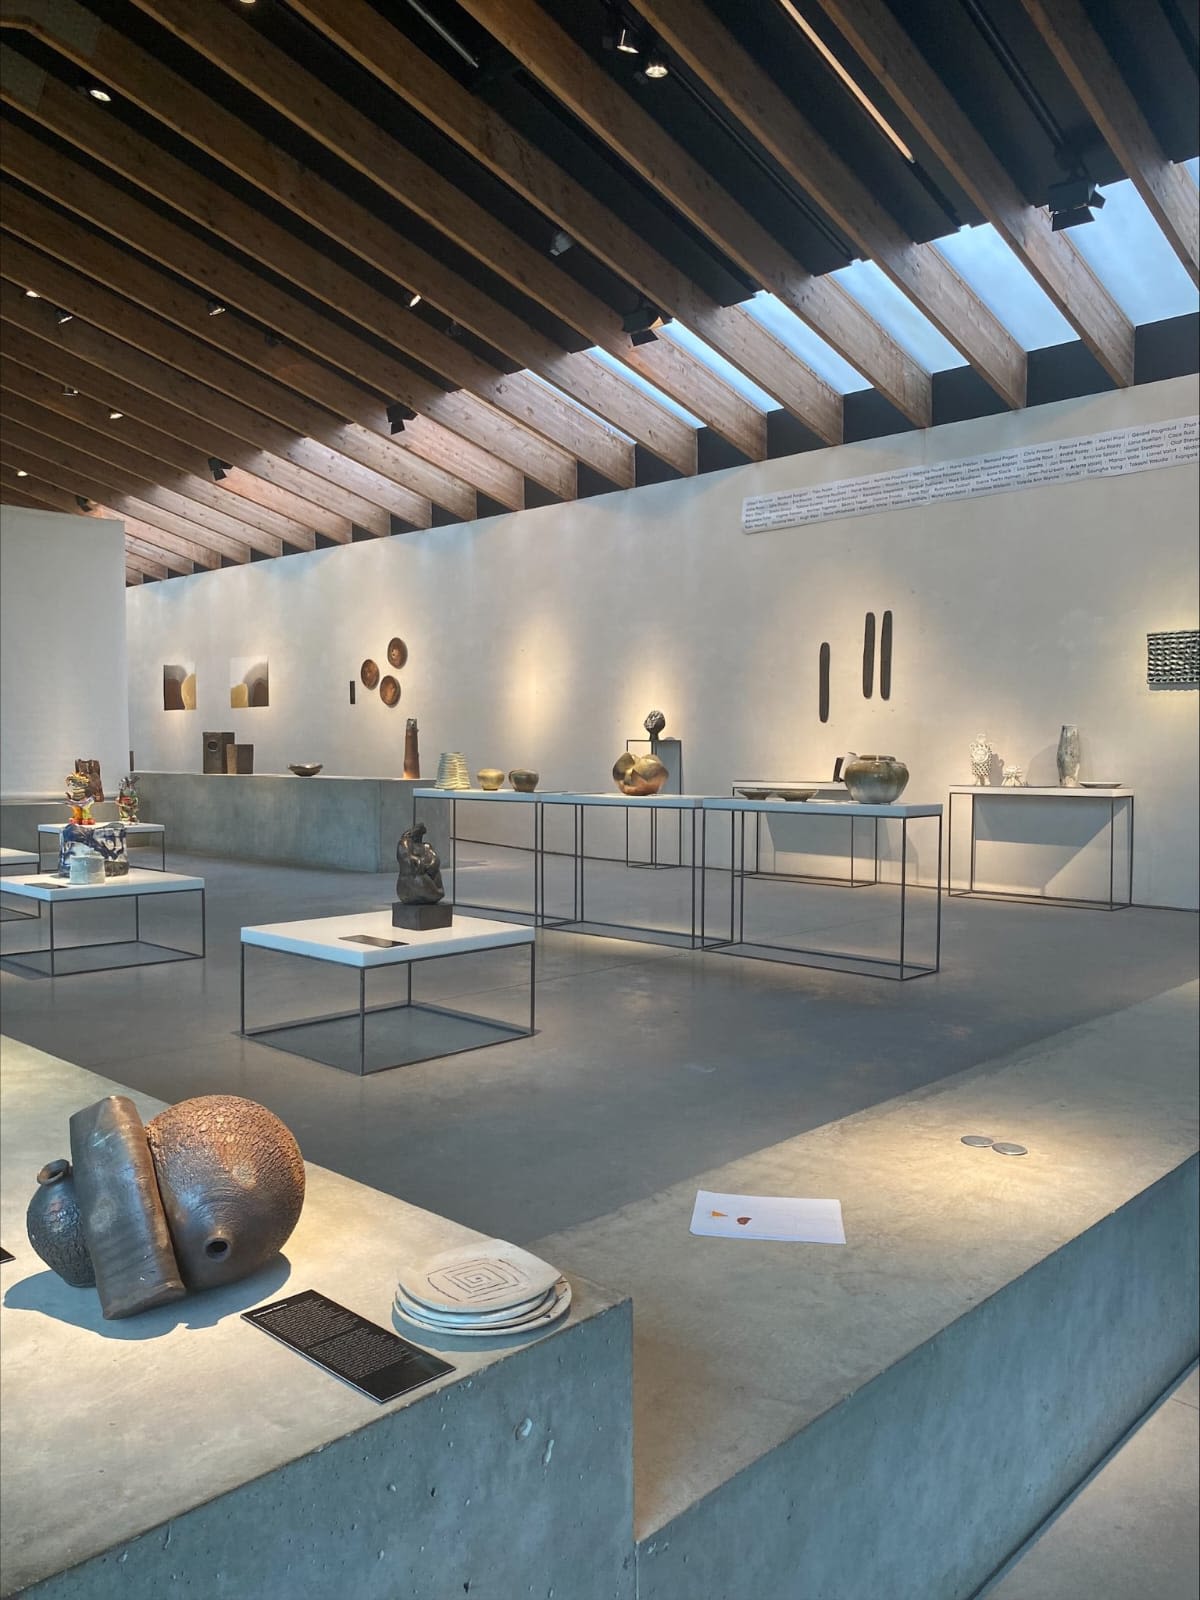 a photograph of the inside of a ceramics' centre, with several ceramic pieces on display.